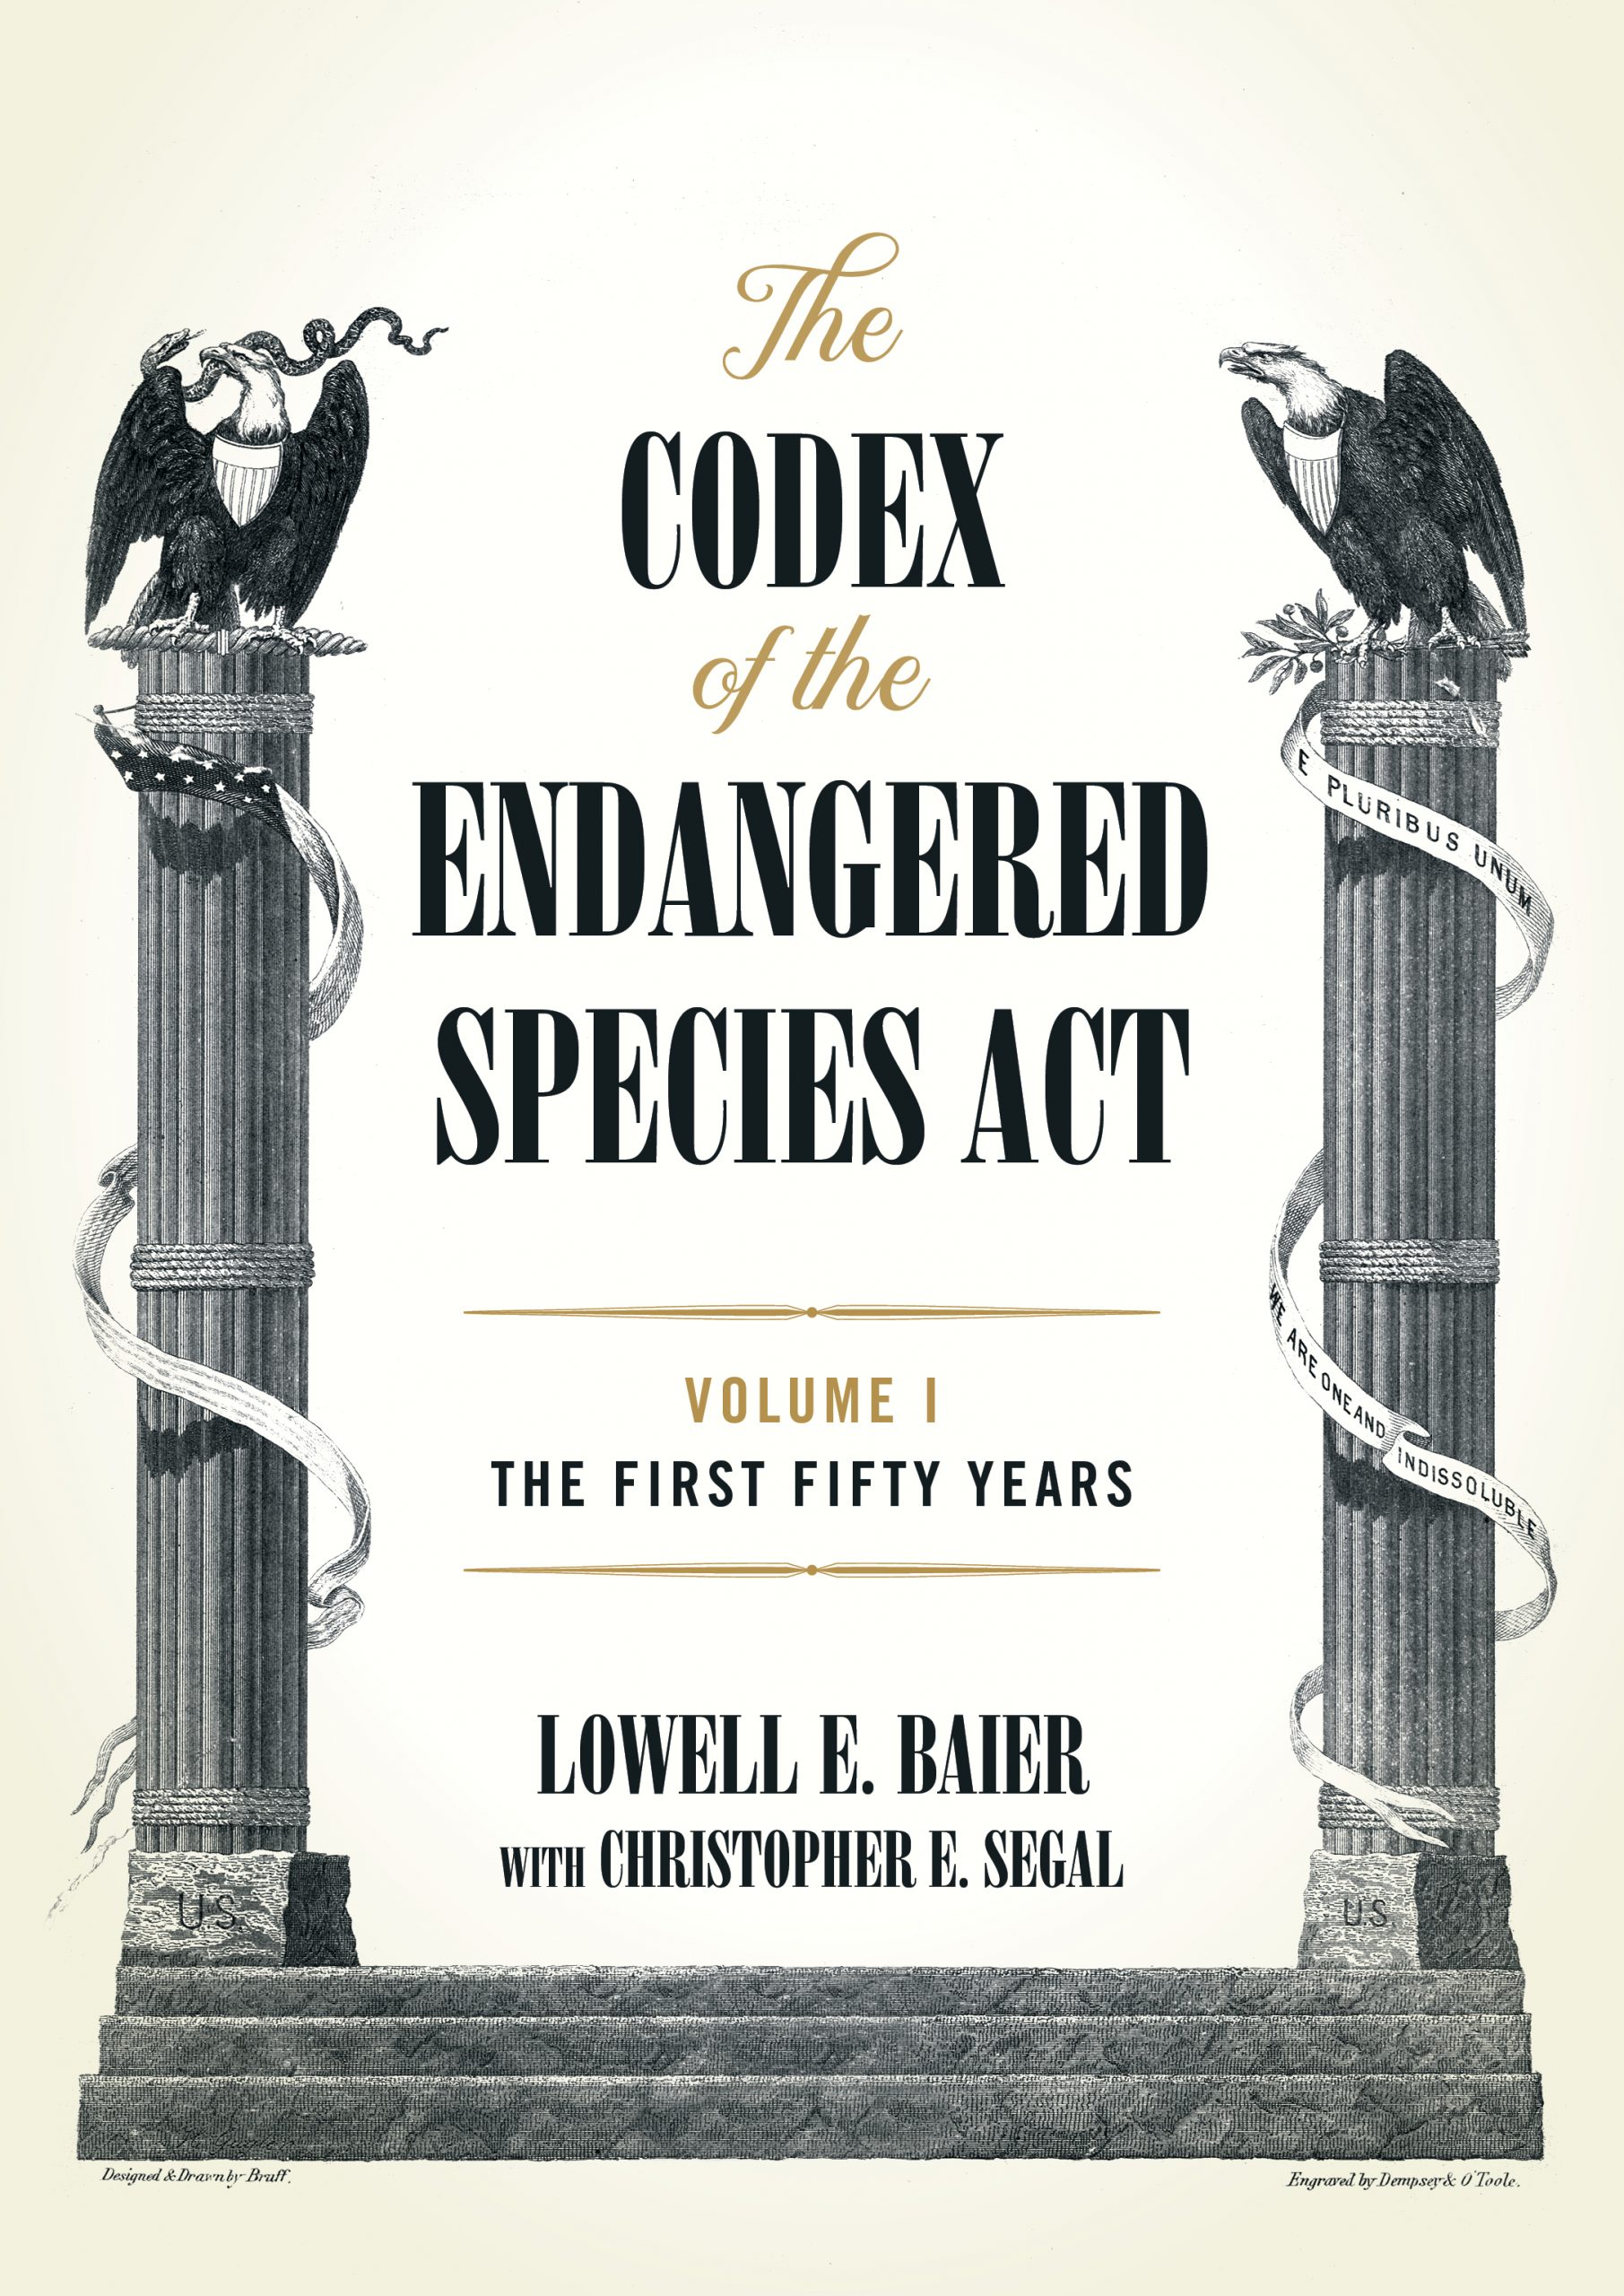 The Codex of the Endangered Species Act Volume I and Volume II